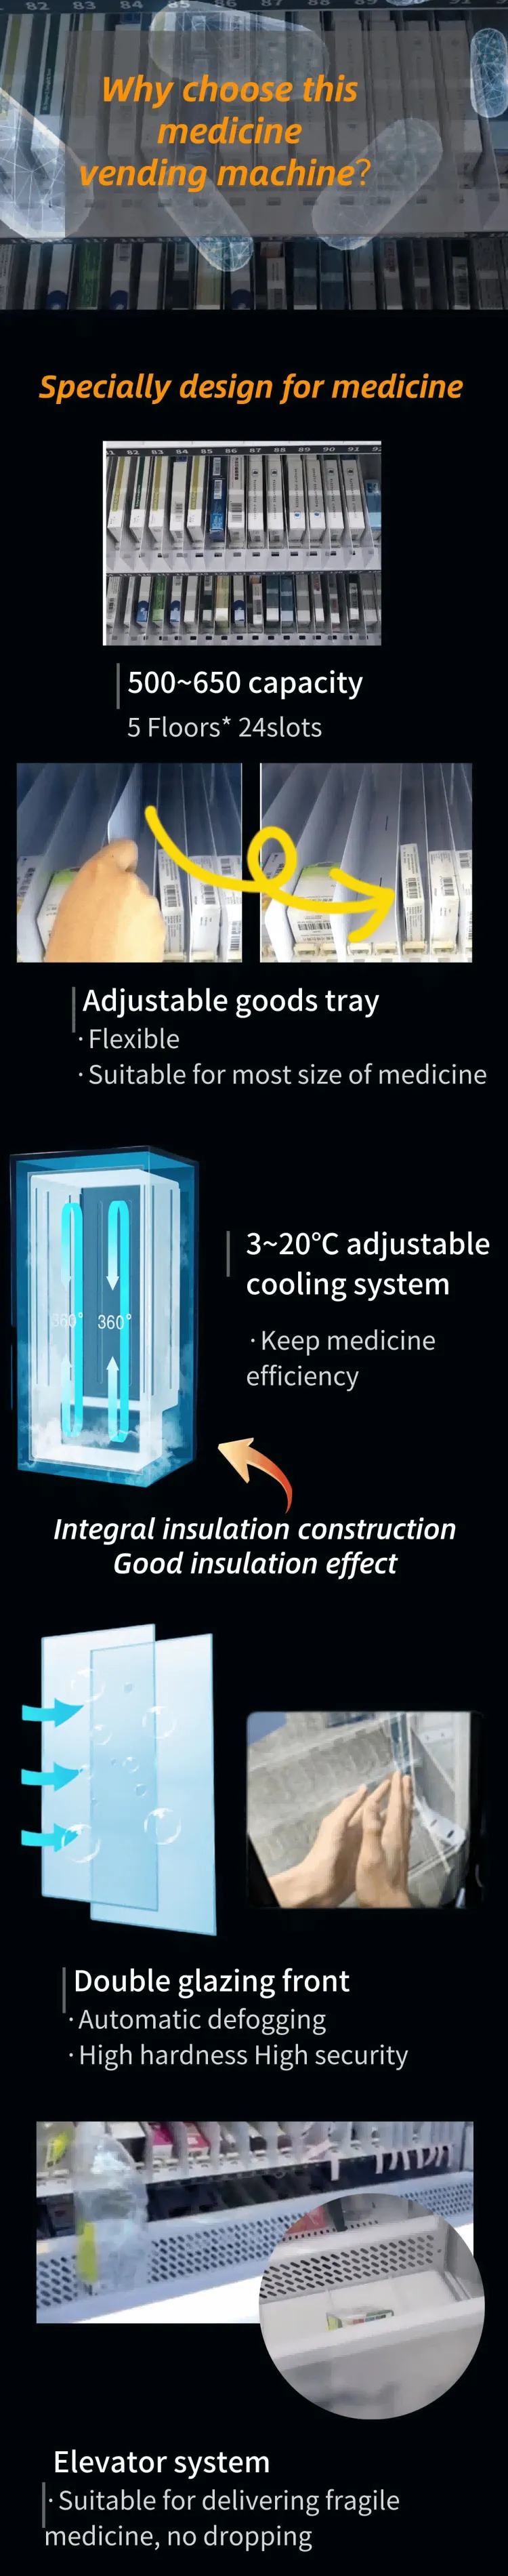 medicine vending machine 24-hour pharmacy for OTC medicine supports age verification, specially designed for medicine, big capacity with adjustable cooling system, double glazing front and elevator system